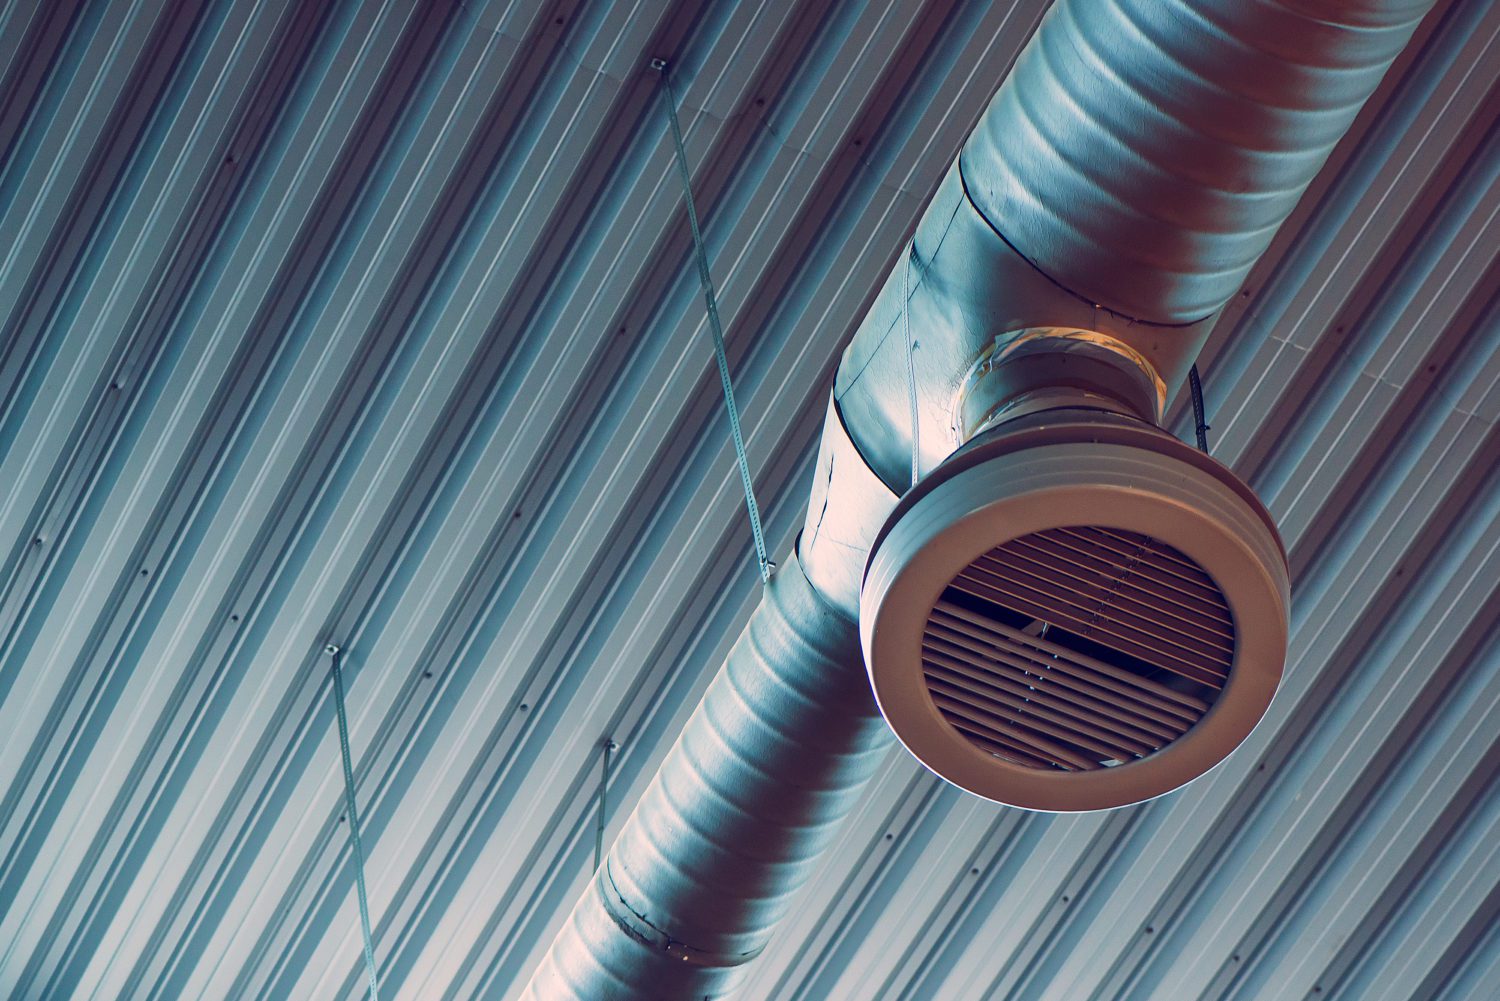 USmaci - Ventilation pipes of an air condition